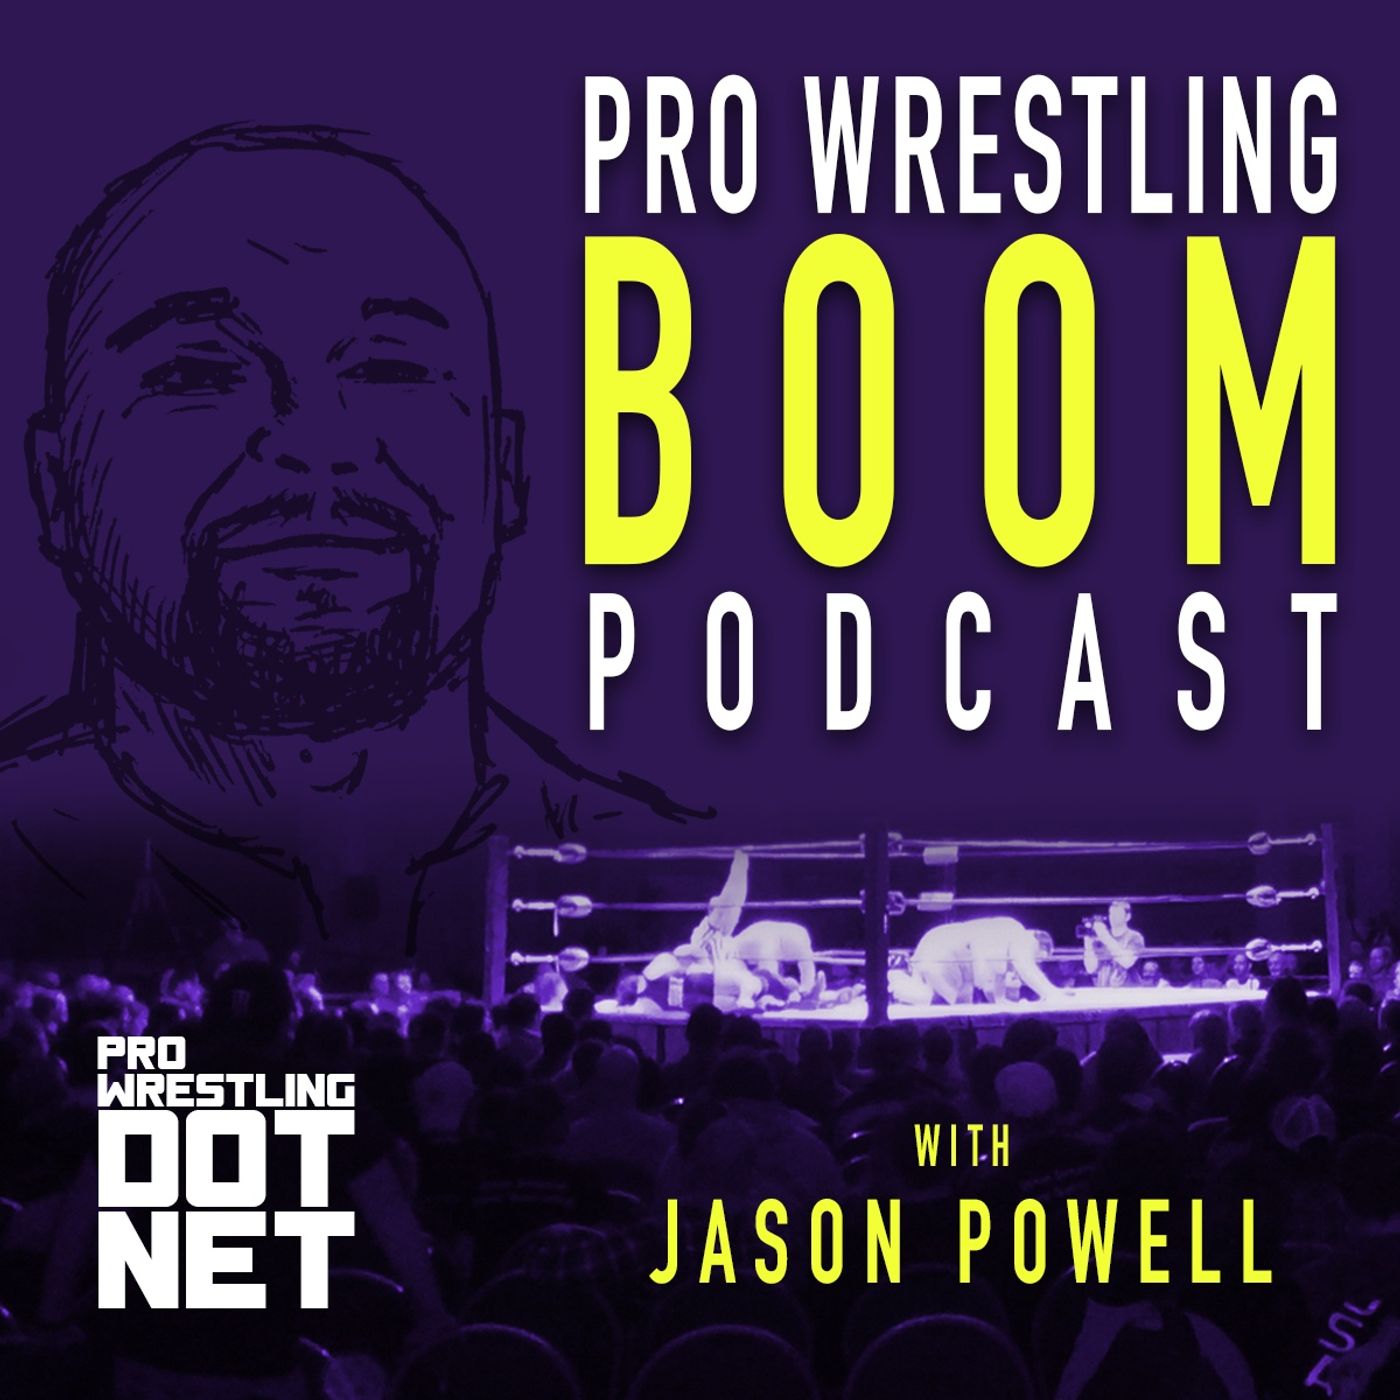 04/08 Pro Wrestling Boom Podcast With Jason Powell (Episode 304): Pro Wrestling Boom Not Quite Live - Post WMXL edition with Jonny Fairplay